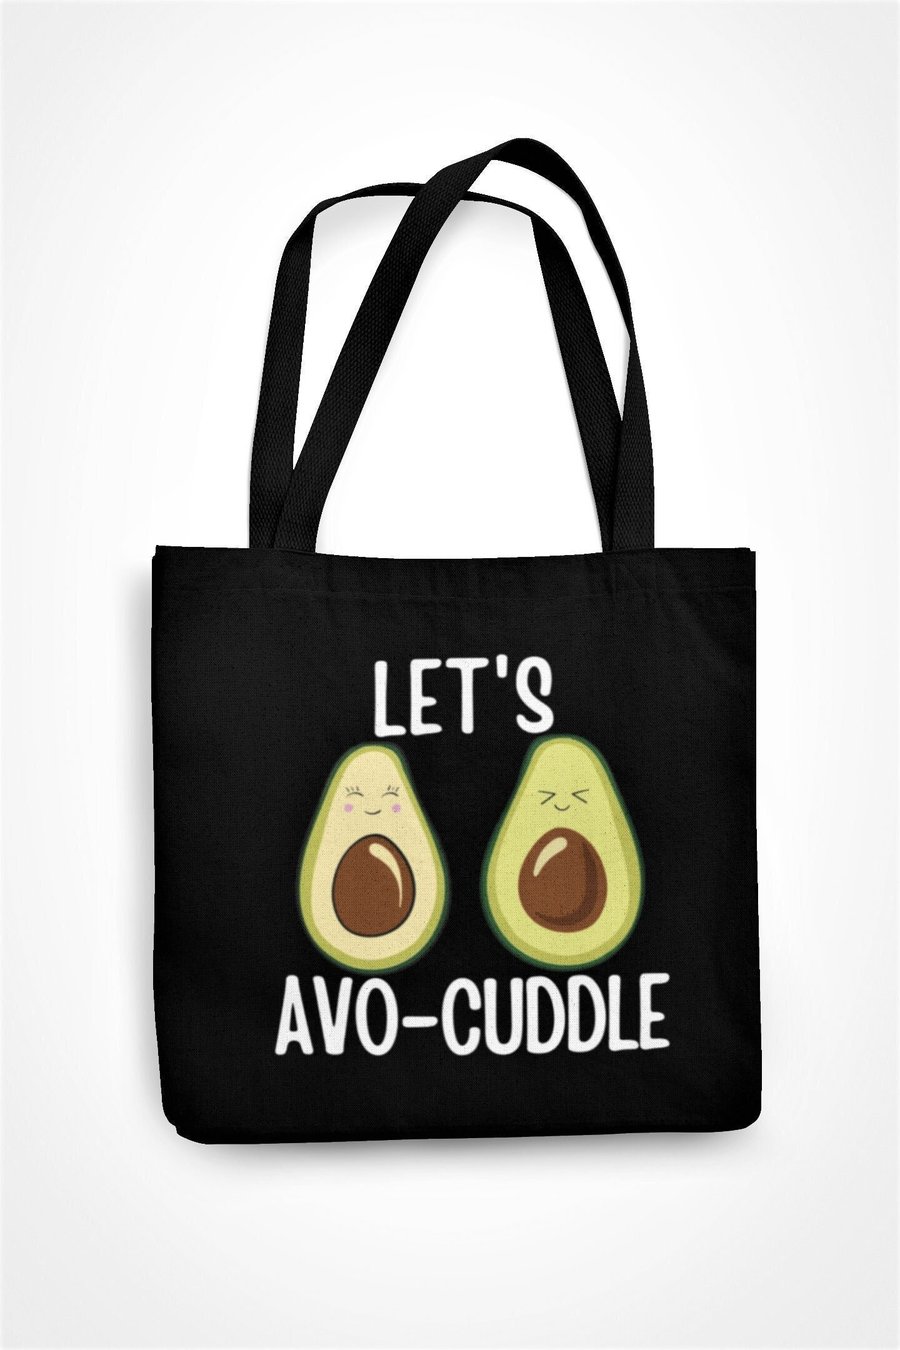 Let's Avo Cuddle Tote Bag Shopping Reusable - Cute Valentines Anniversary Gift -